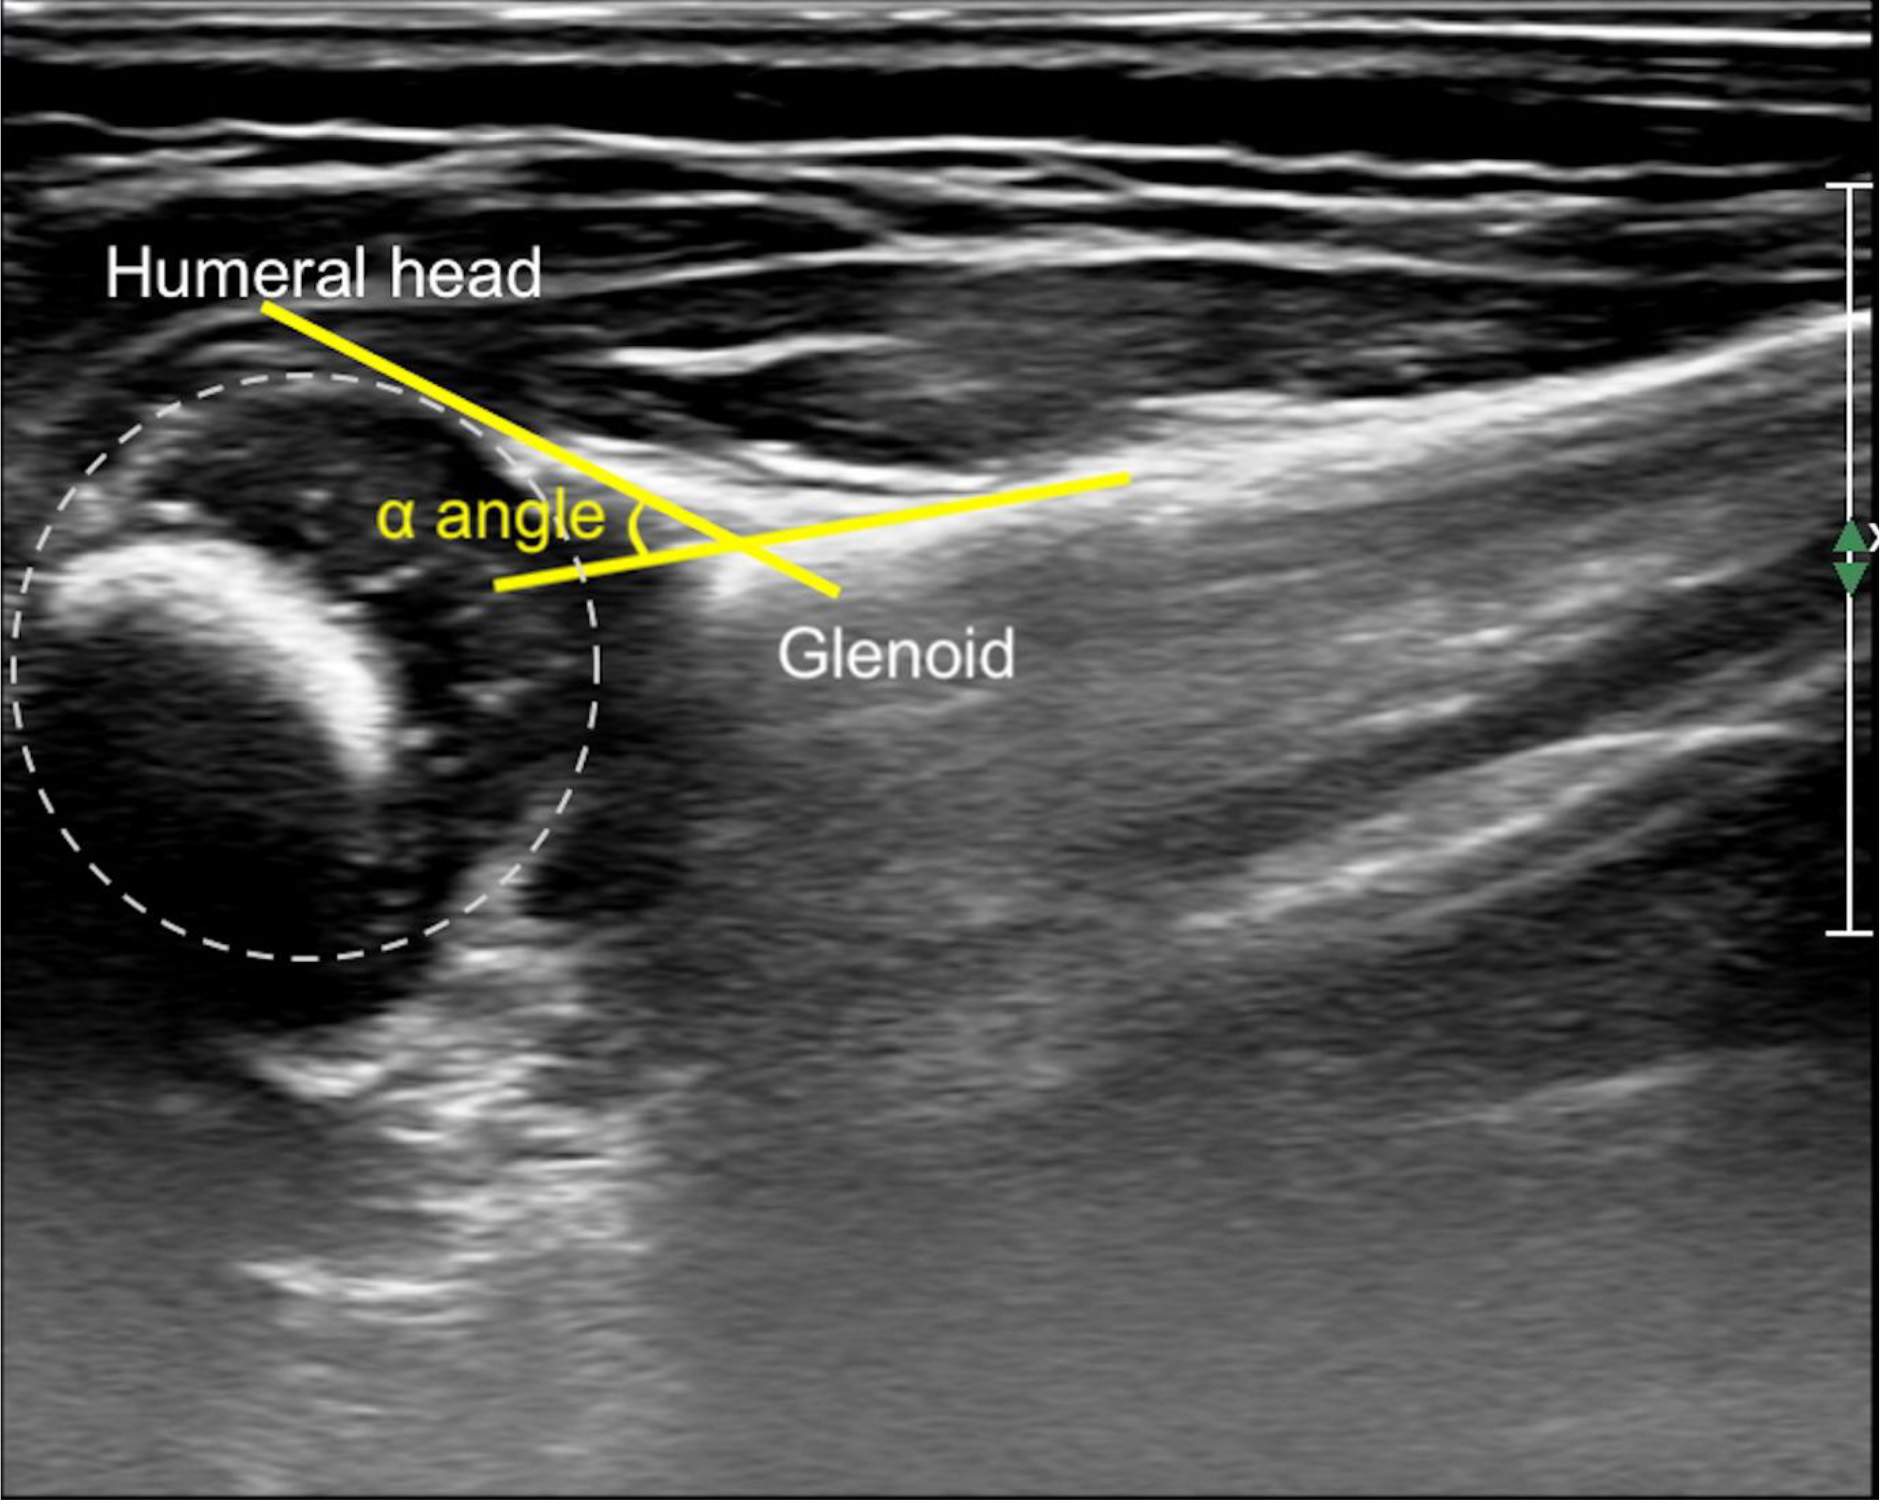 Ultrasound image of an affected shoulder of an infant with neonatal brachial plexus palsy. The α angle is determined by the meeting point of a line along the back edge of the shoulder blade and a tangent line from the rear of the glenoid labrum to the humeral head. A normal α angle is typically 30∘ or less.